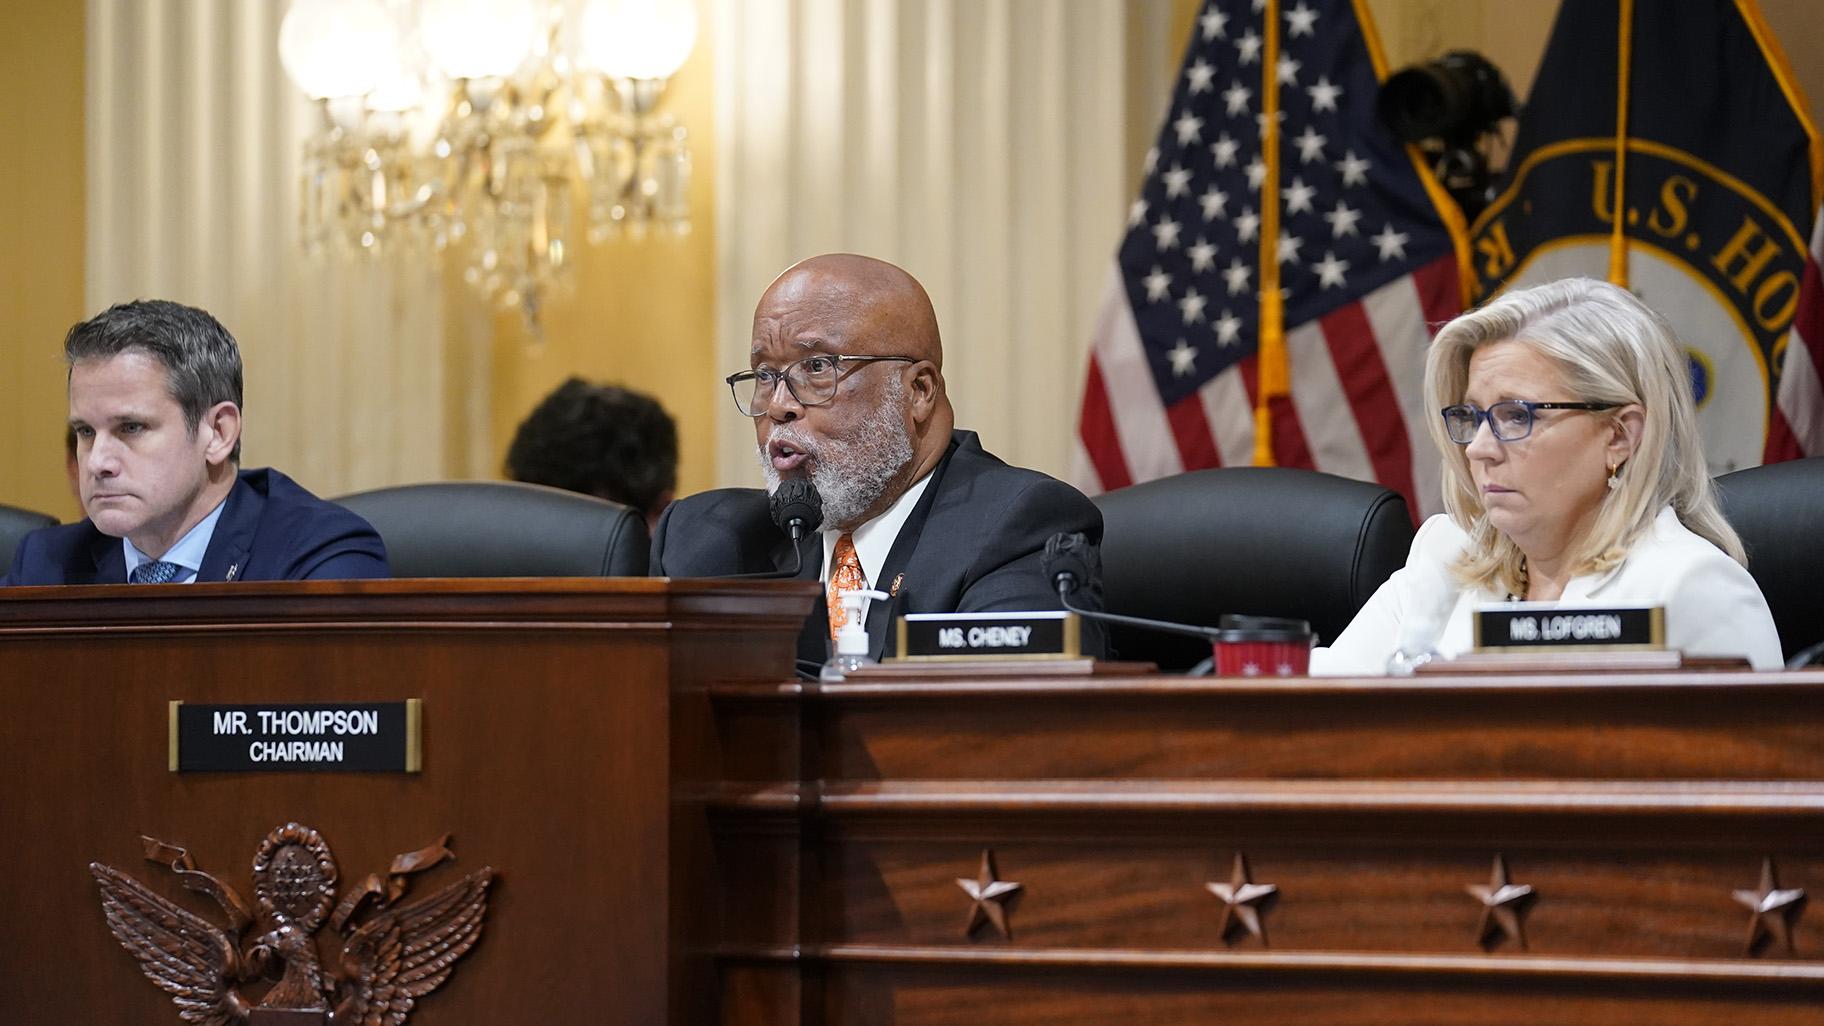 Chairman Bennie Thompson, D-Miss., center, speaks as the House select committee investigating the Jan. 6 attack on the U.S. Capitol continues to reveal its findings of a year-long investigation, at the Capitol in Washington, Thursday, June 23, 2022. Rep. Adam Kinzinger, R-Ill., left, and Vice Chair Liz Cheney, R-Wyo., right, listen. (AP Photo / J. Scott Applewhite)